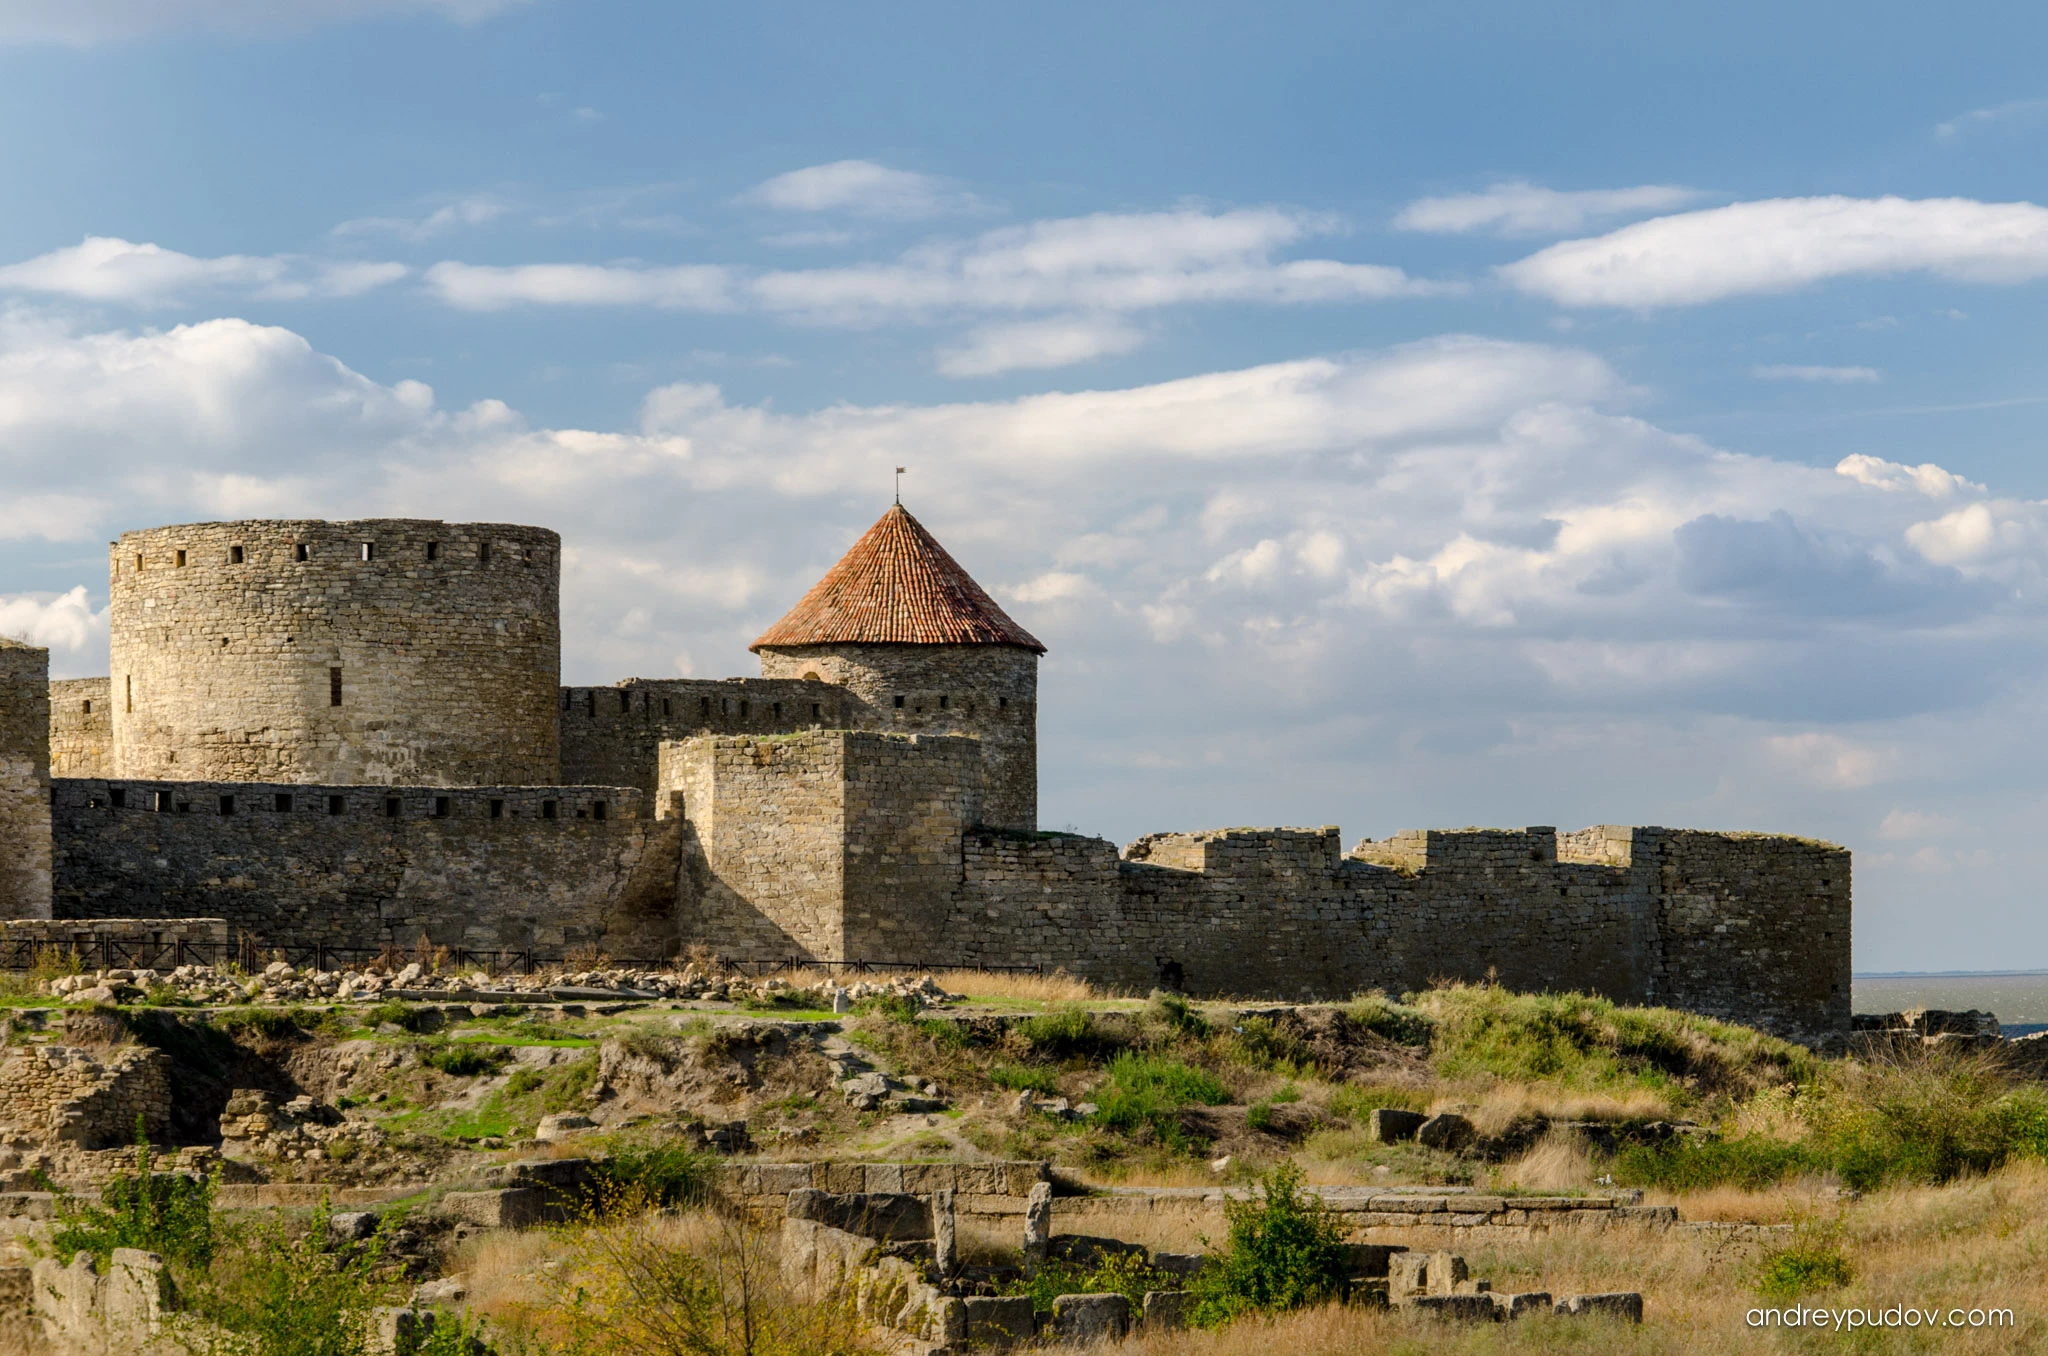 Little Russia - In the 15th century, The Ottoman Empire repeatedly tried to capture the city. The hardest siege was in August 1484, when a 300,000-man army of the Ottoman sultan Bayezid II and 50,000 troops of the Crimean Khan Meñli I Giray supported by over 100 large ships besieged the castle on the coast and estuary. After a 9-day siege, the fortress was taken. In 1485, the owner Stephen the Great tried to recapture Bilhorod, but he failed. Turkish people would rule there for 328 years. In 1918, Romania briefly reestablished control over Budjak after the unification of Romania and Bessarabia in 1918, but the Soviets reclaimed the city and the surrounding territory in 1940 and again in 1944.